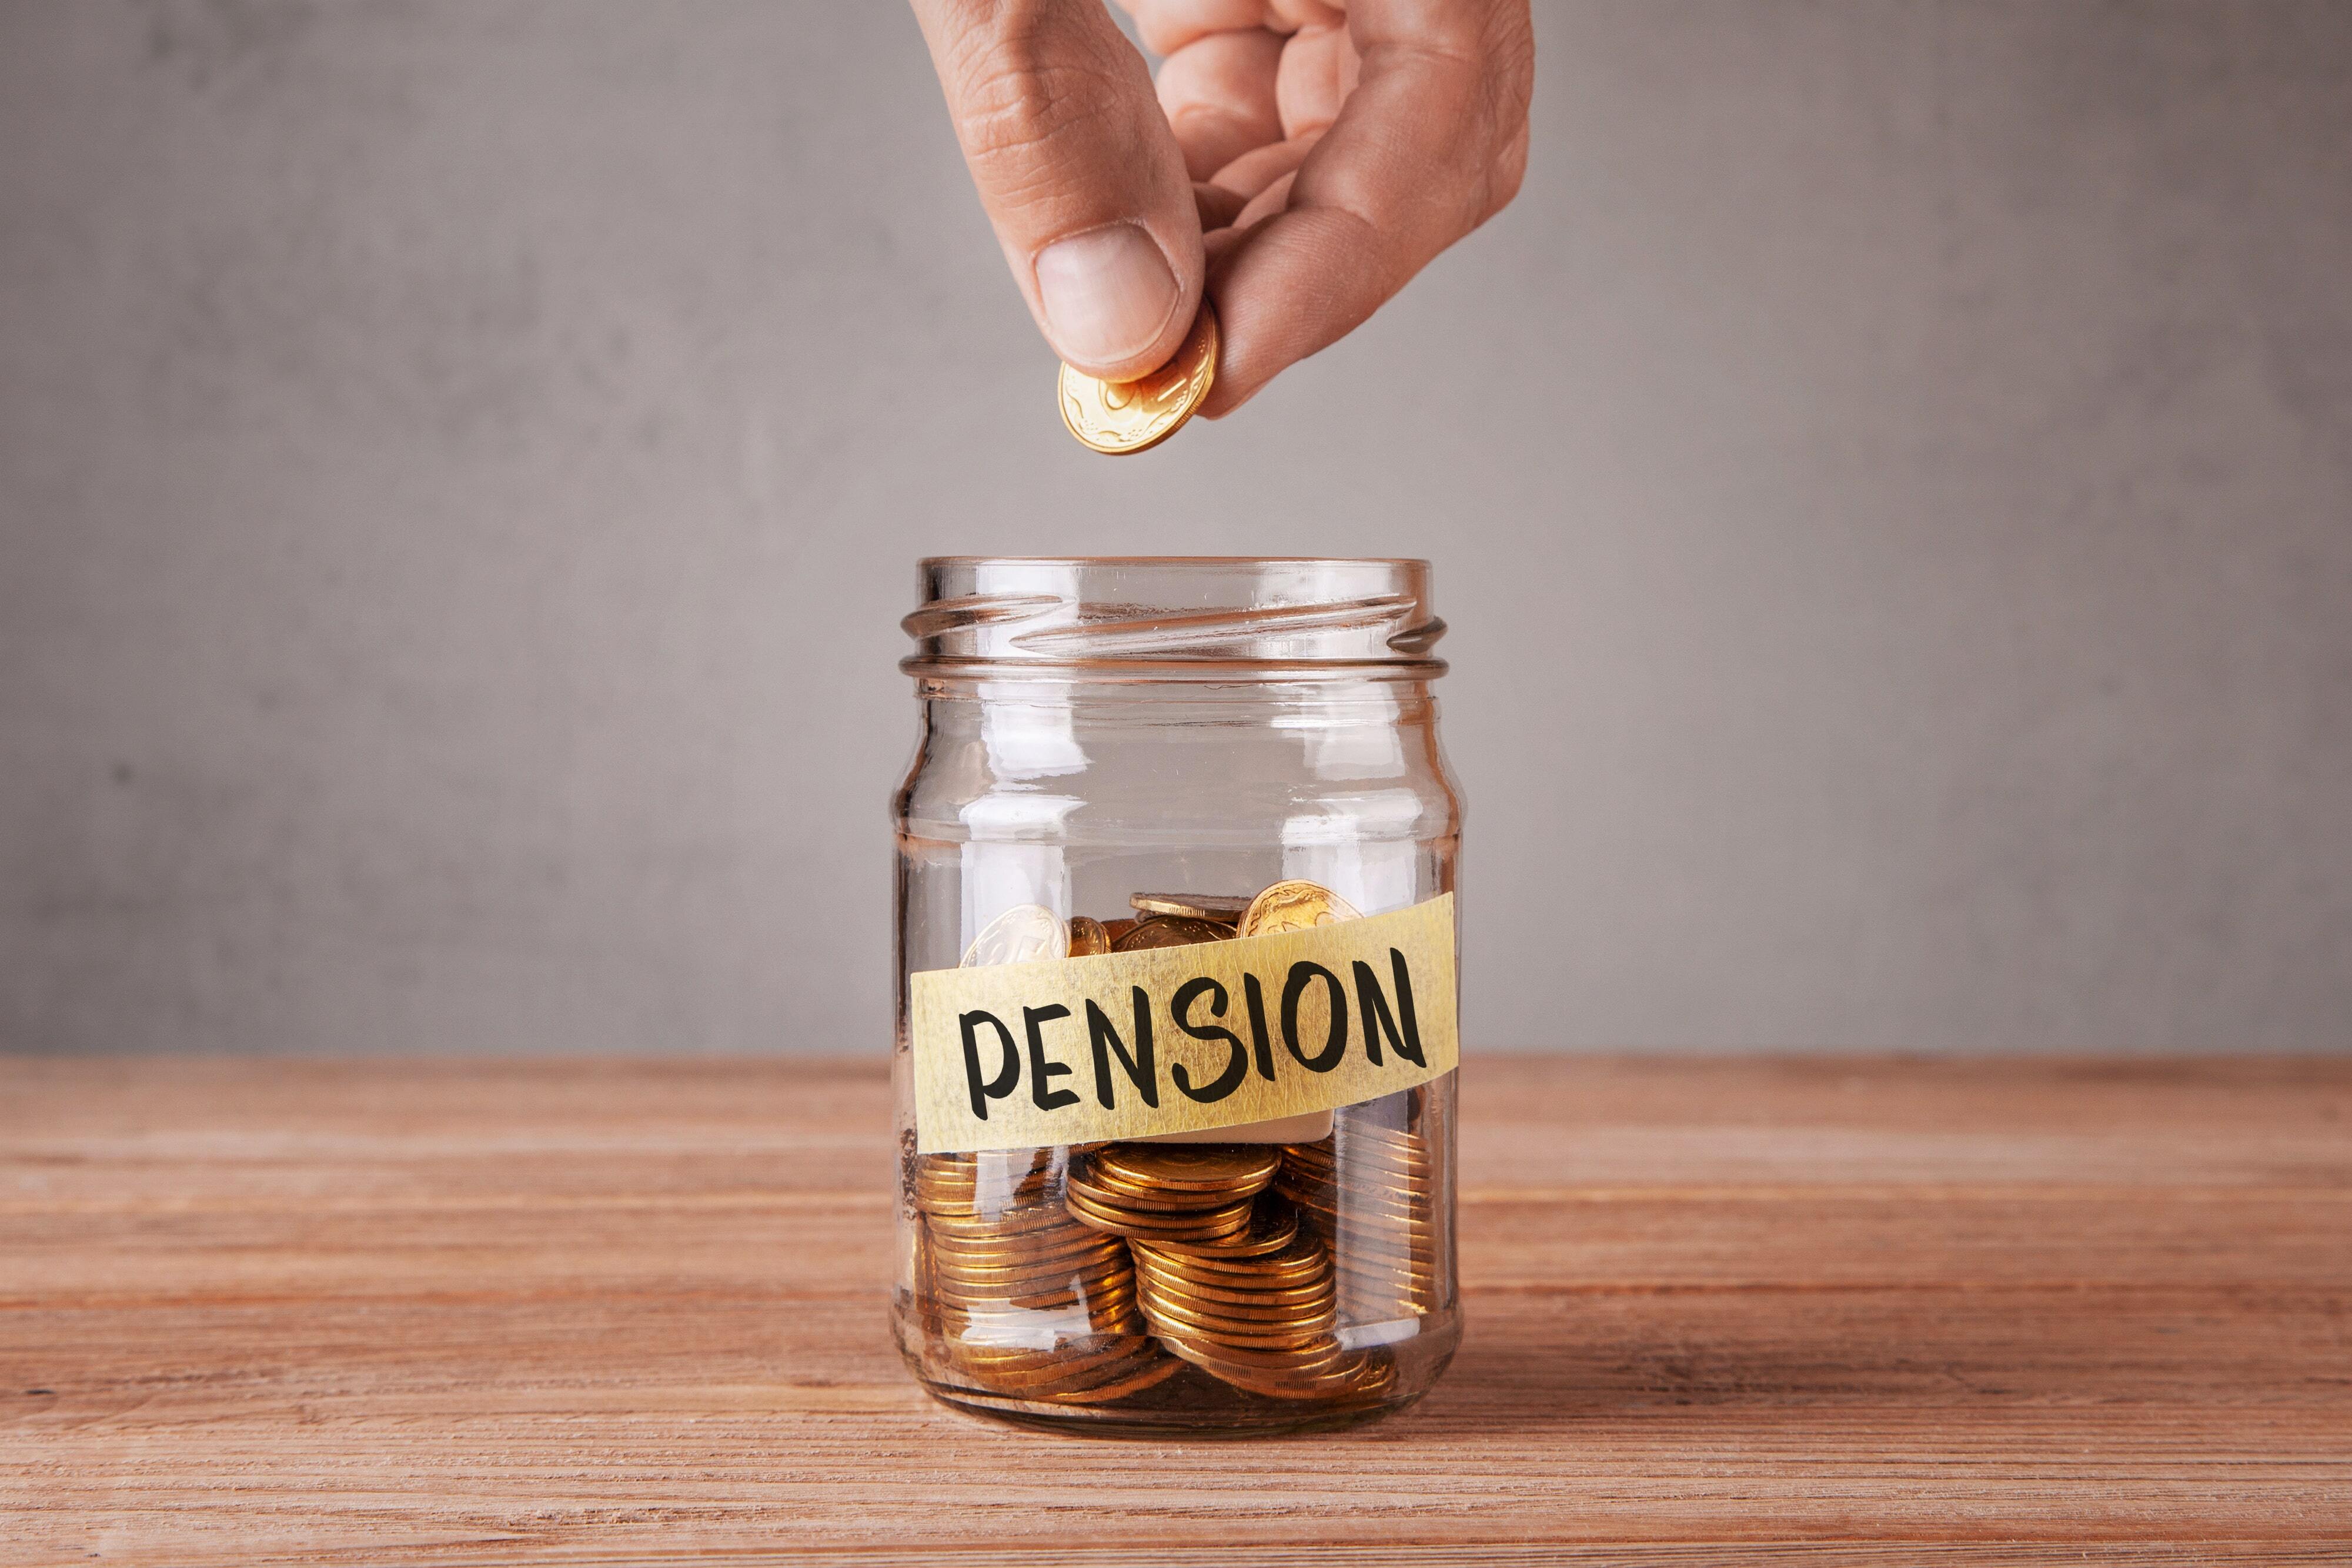 Is your workplace pension fit for the future?